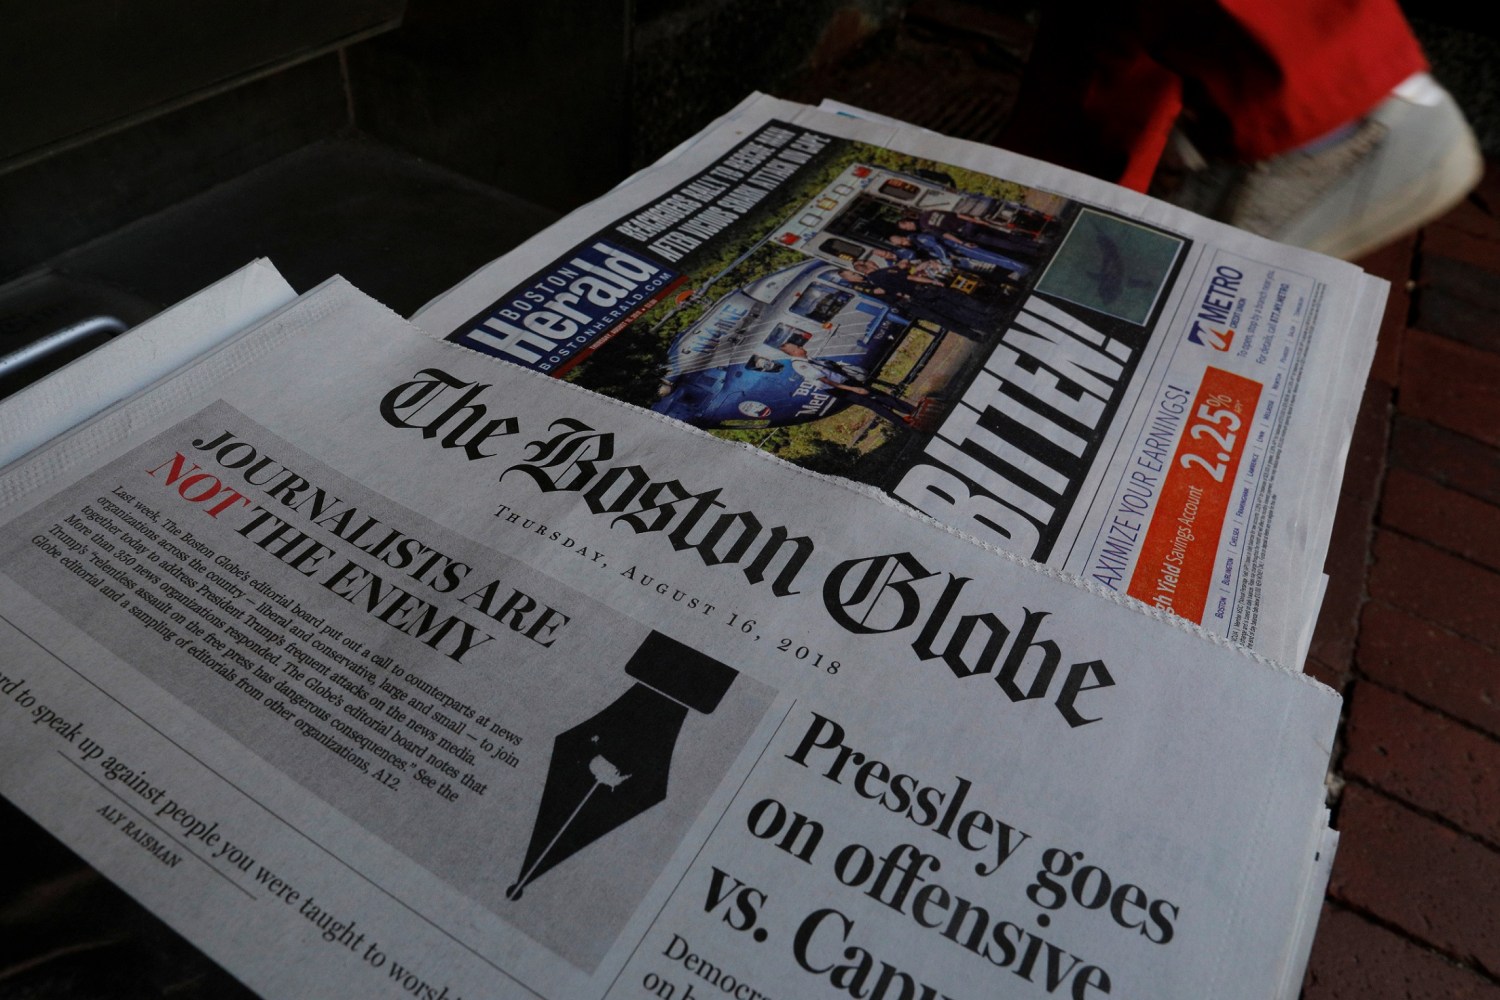 A customer walks past the front page of the Boston Globe newspaper referencing their editorial defense of press freedom and a rebuke of President Donald Trump for denouncing some media organizations as enemies of the American people, part of a nationwide editorial effort coordinated by the Boston Globe, at a newsstand in Cambridge, Massachusetts, U.S., August 16, 2018.     REUTERS/Brian Snyder - RC13AB4553F0